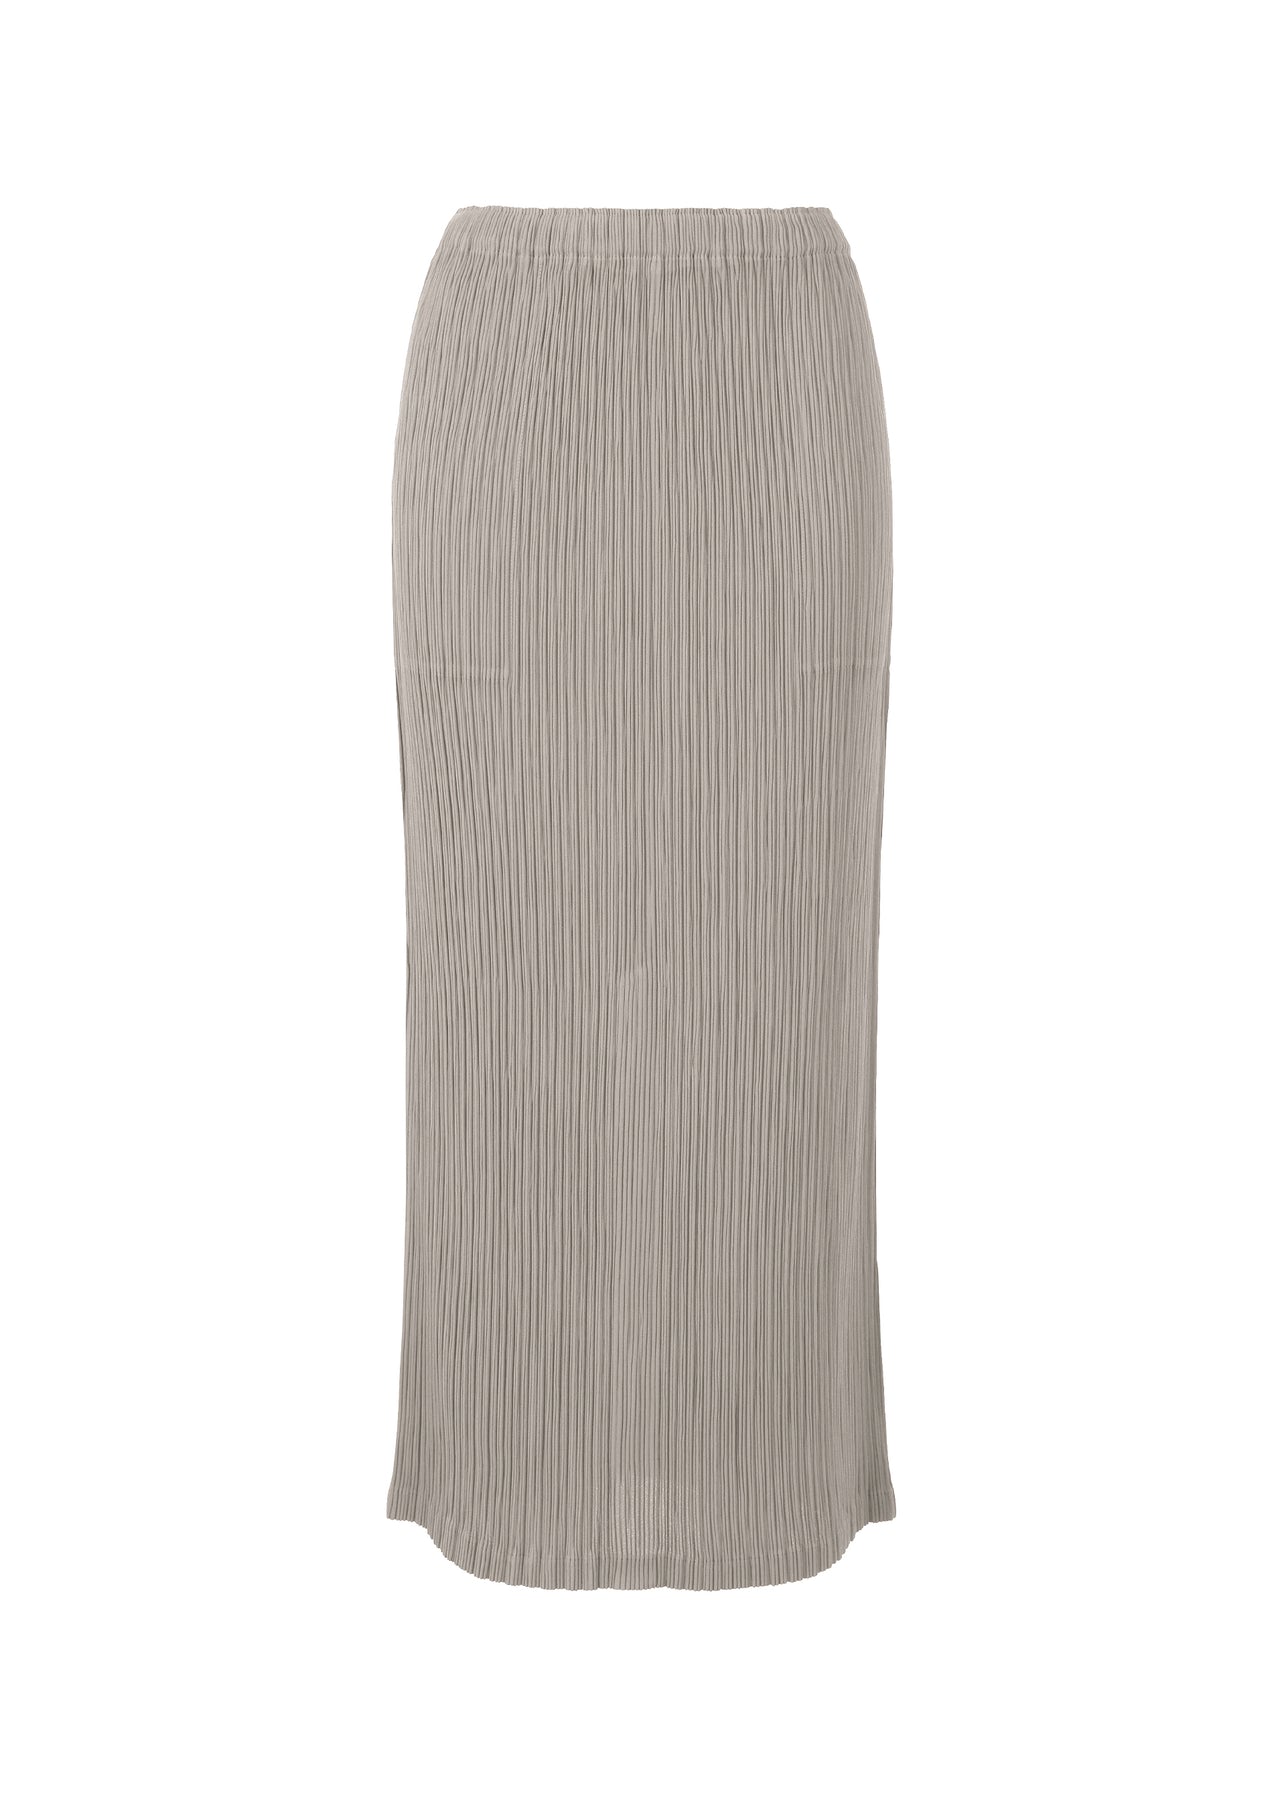 HATCHING PLEATS SKIRT | The official ISSEY MIYAKE ONLINE STORE